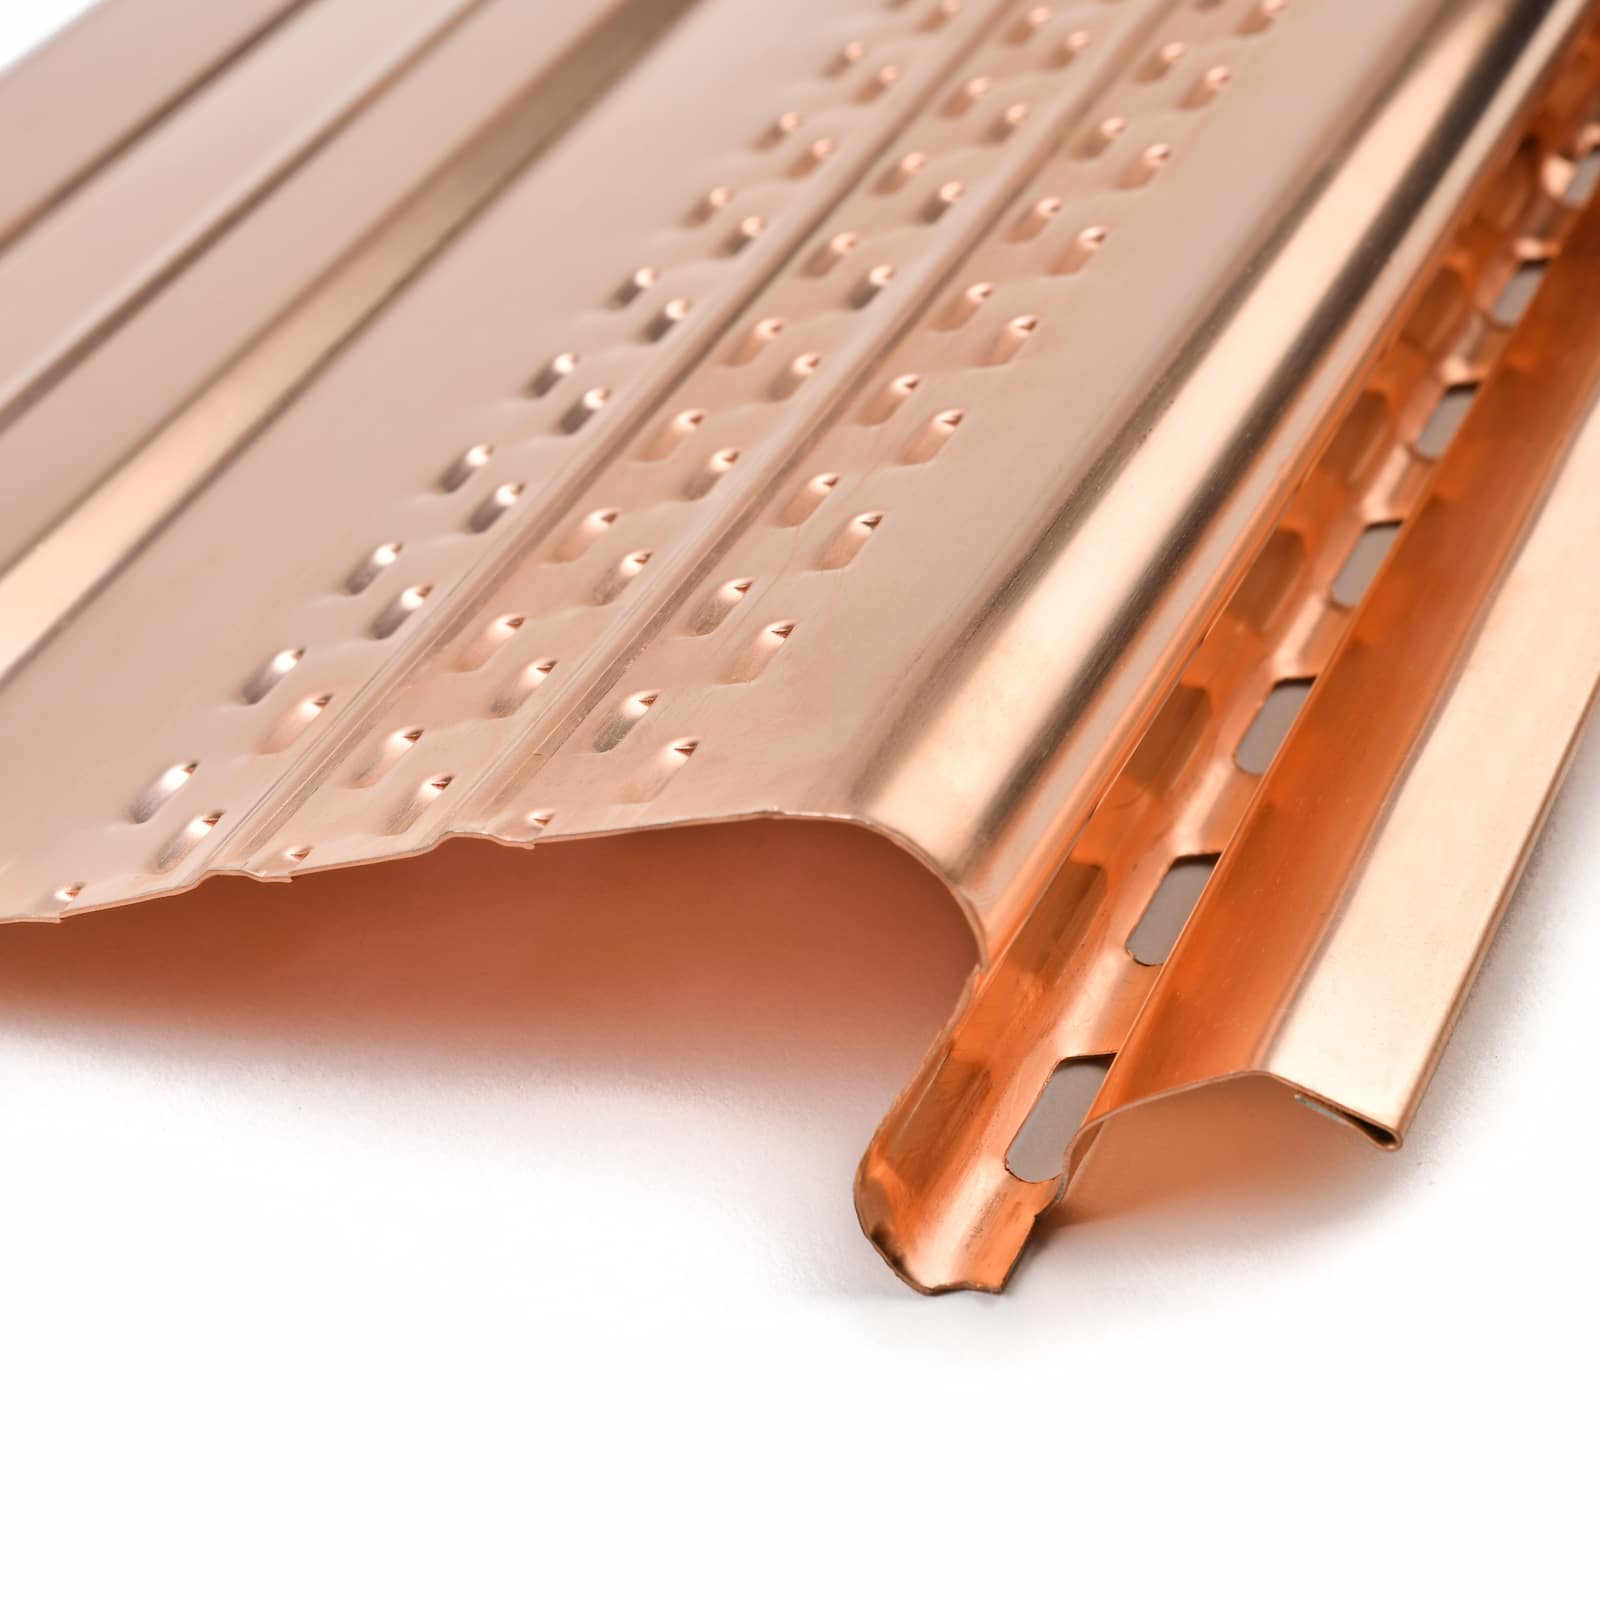 COPPER/GUTTER/GUARDS/GUARD/COVER/PROTECTION/HELMET/LEAF COVER/LEAFGUARDS/LEAFGURAD/LEAF PROTECTION/LEAF4GO/HALF ROUND GUARDS/